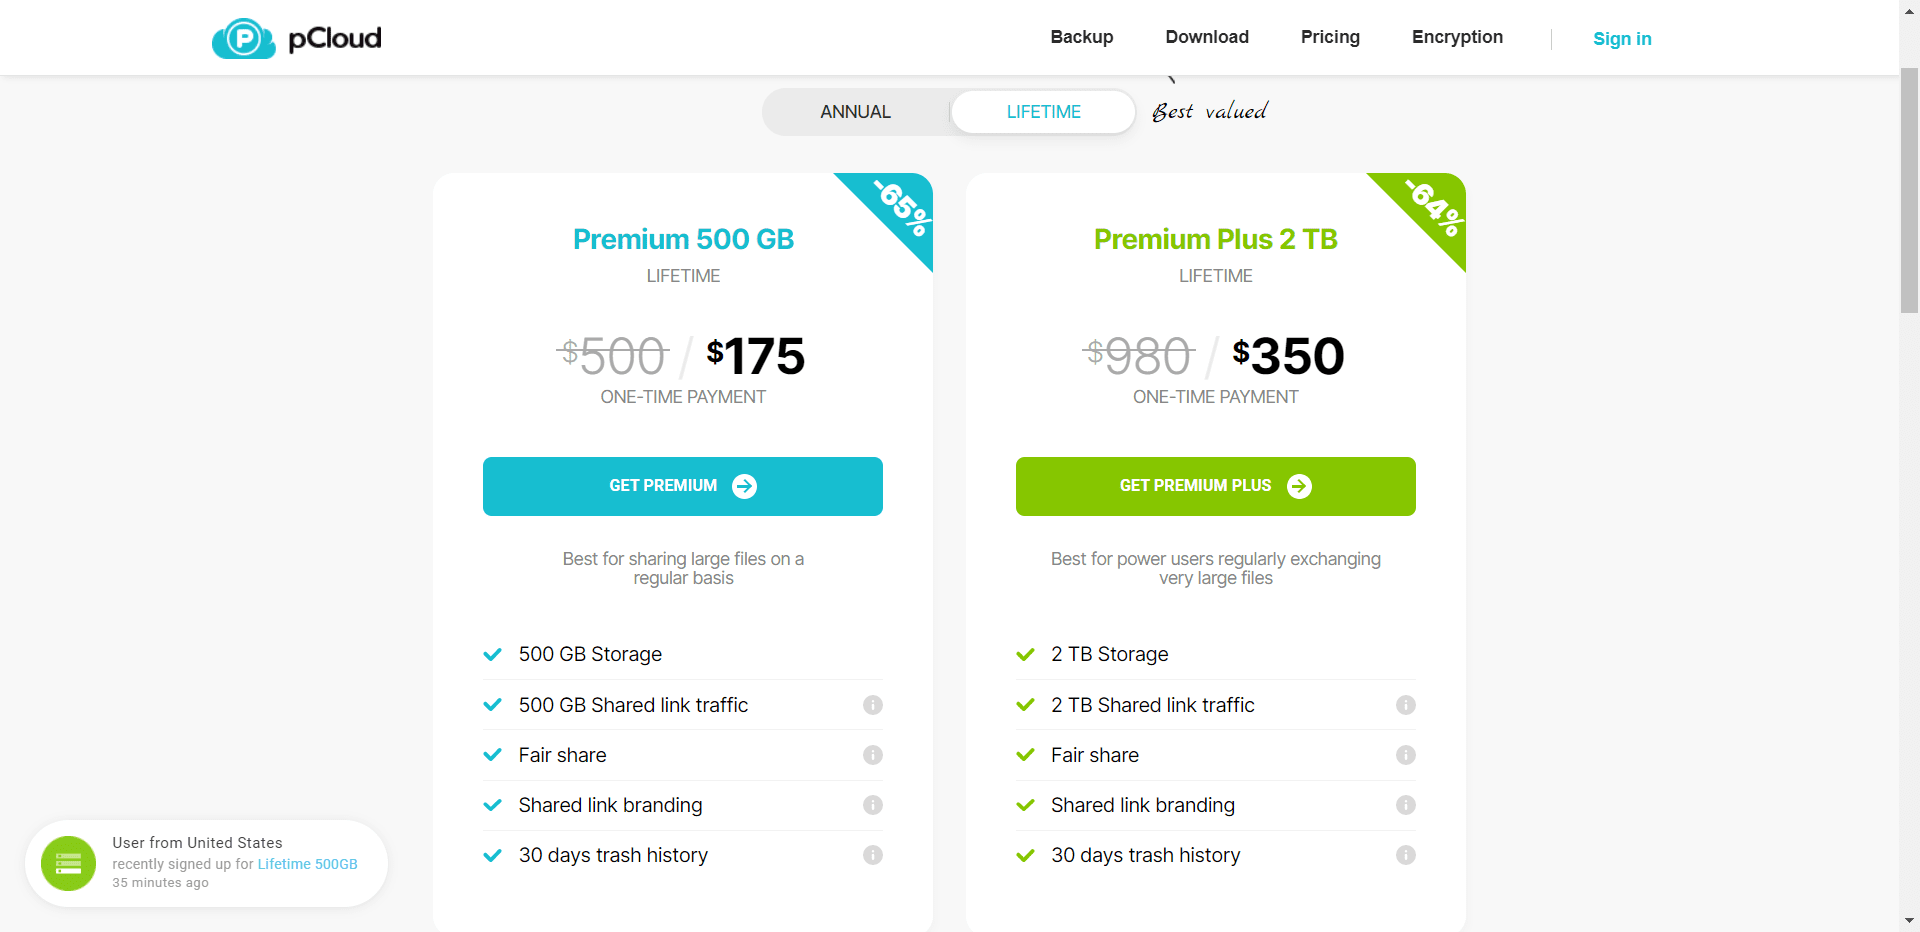 pCloud pricing plans